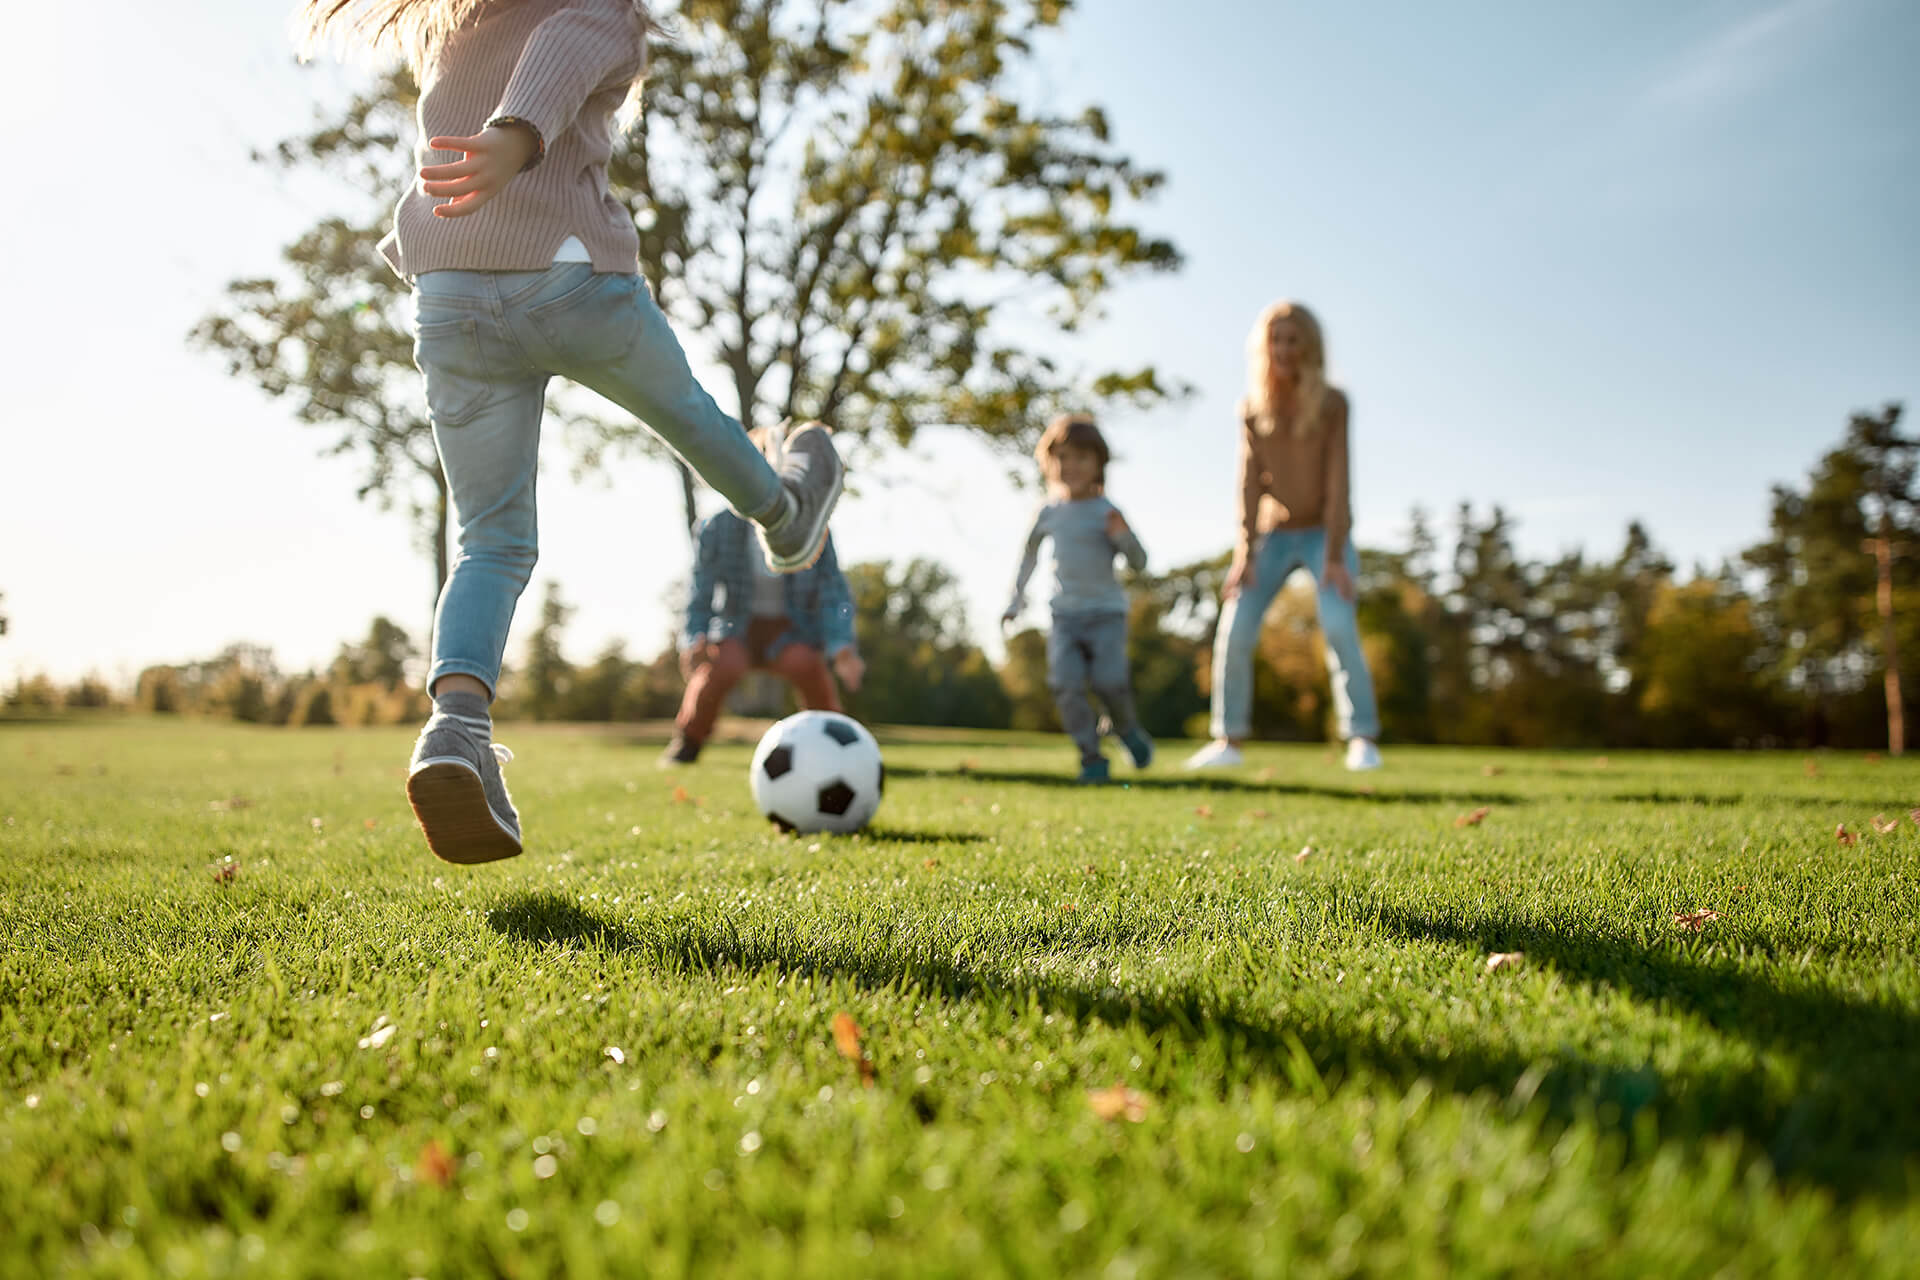 Kids outside playing soccer on a grass field